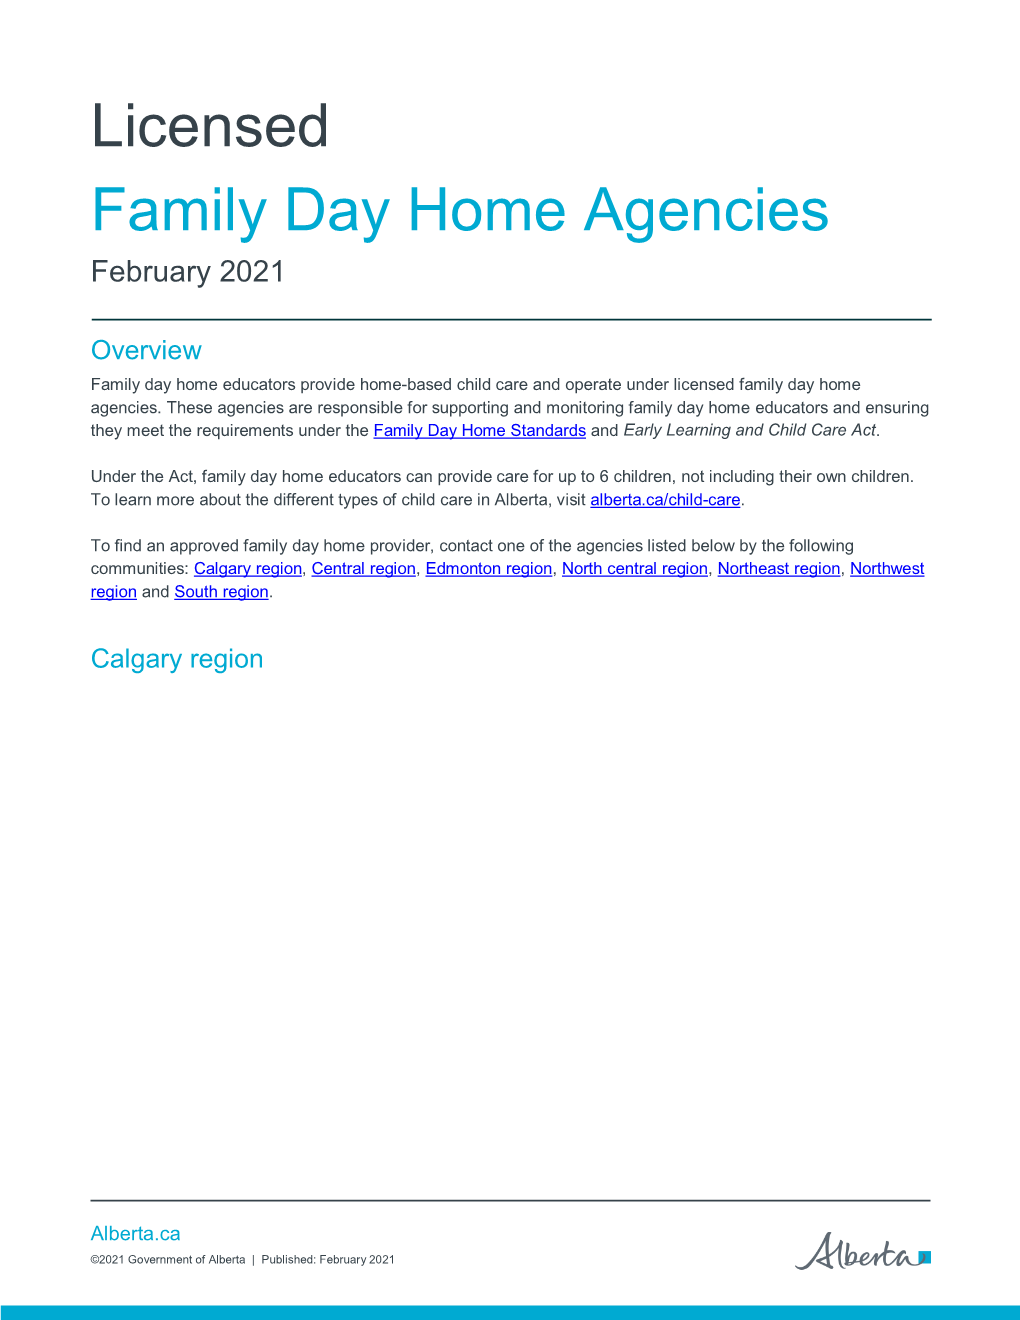 Licensed Family Day Home Agencies February 2021